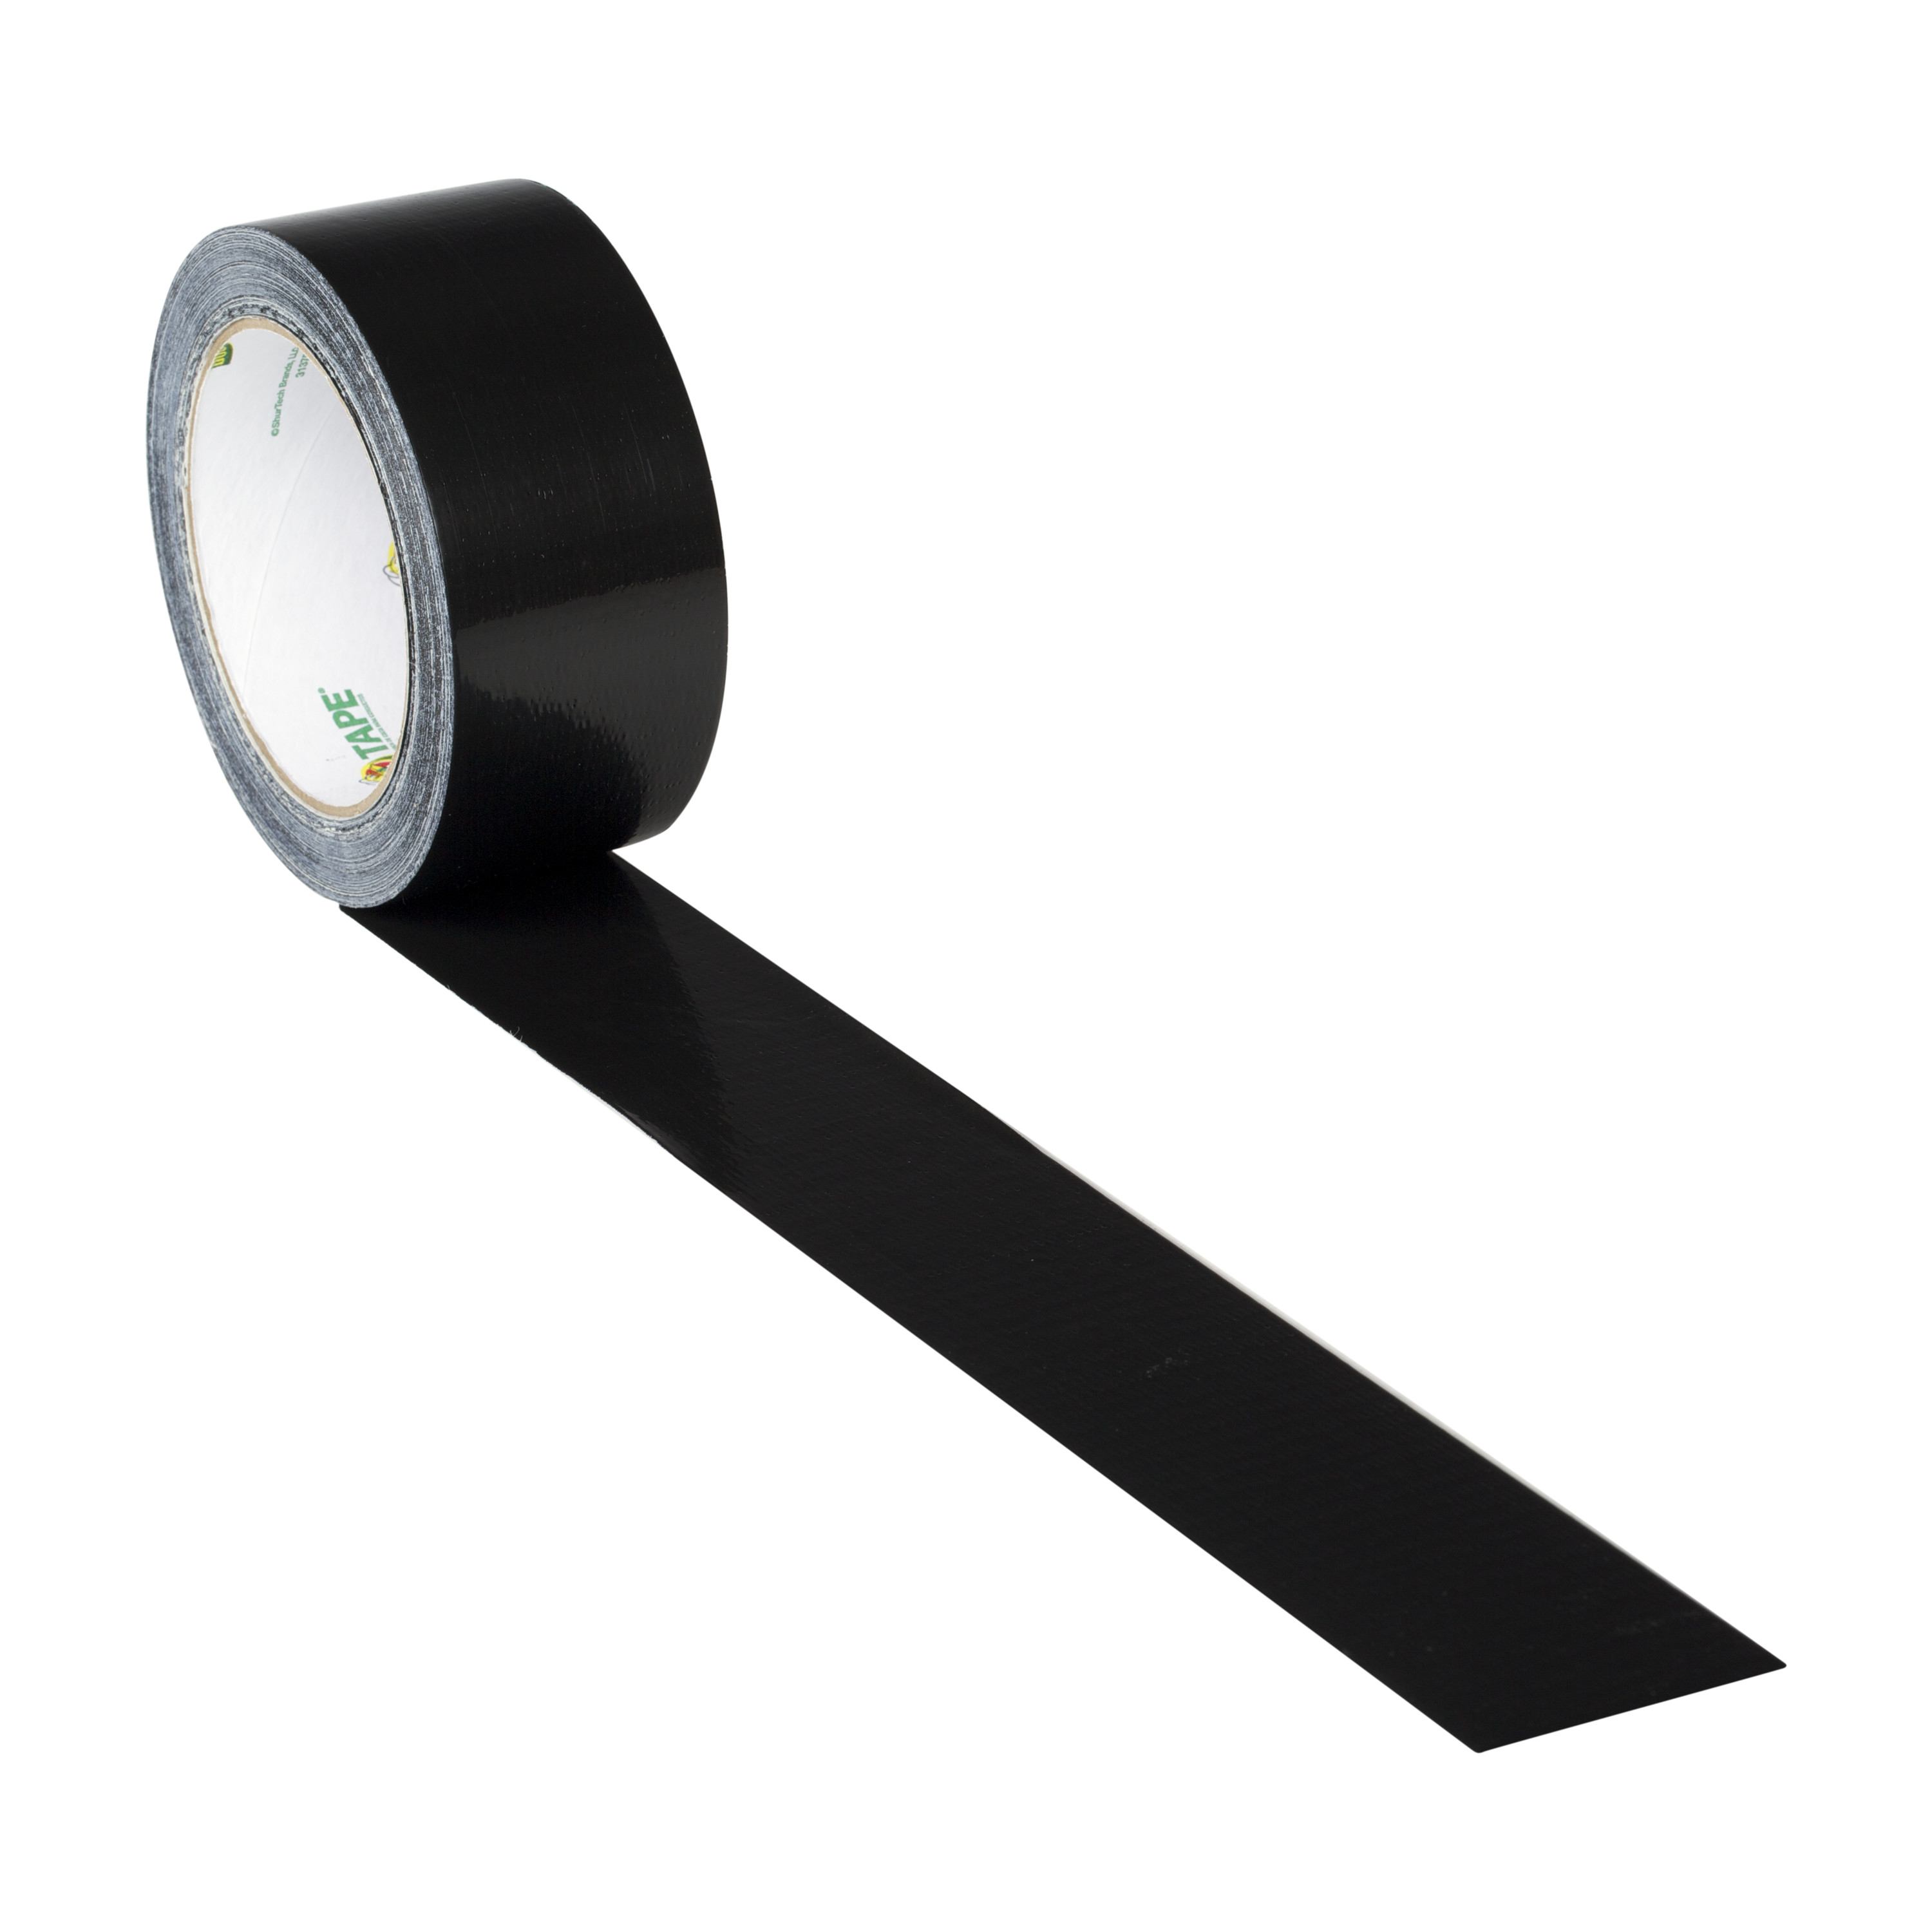 Duck Tape Brand Black Duct Tape, 1.88 in. x 20 yd. - image 3 of 12